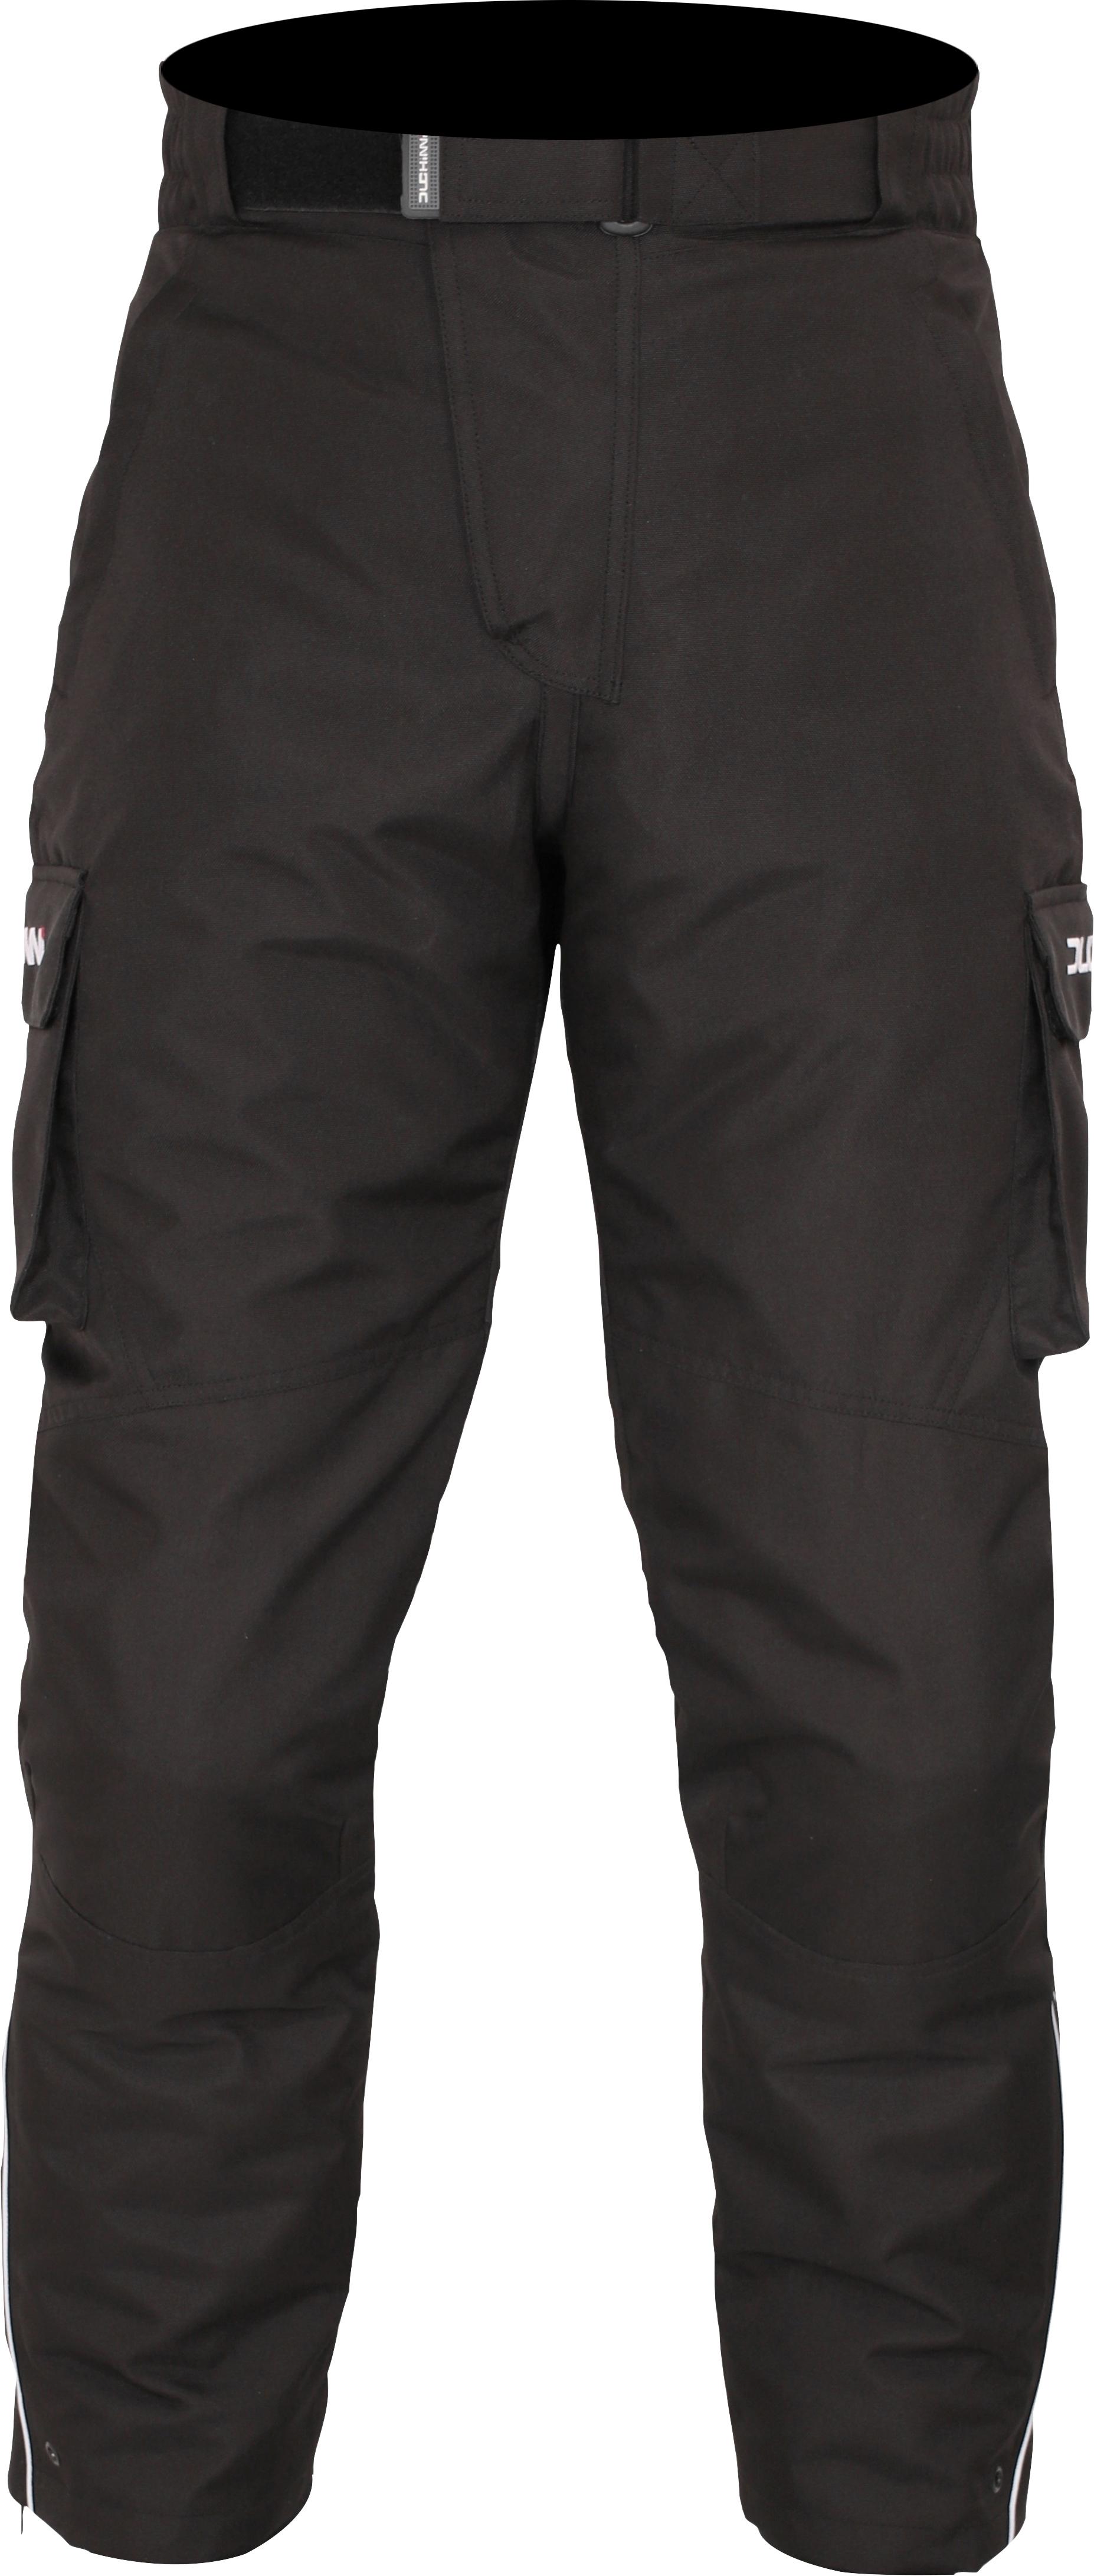 Duchinni Pacific Motorcycle Short Jeans - Black, S